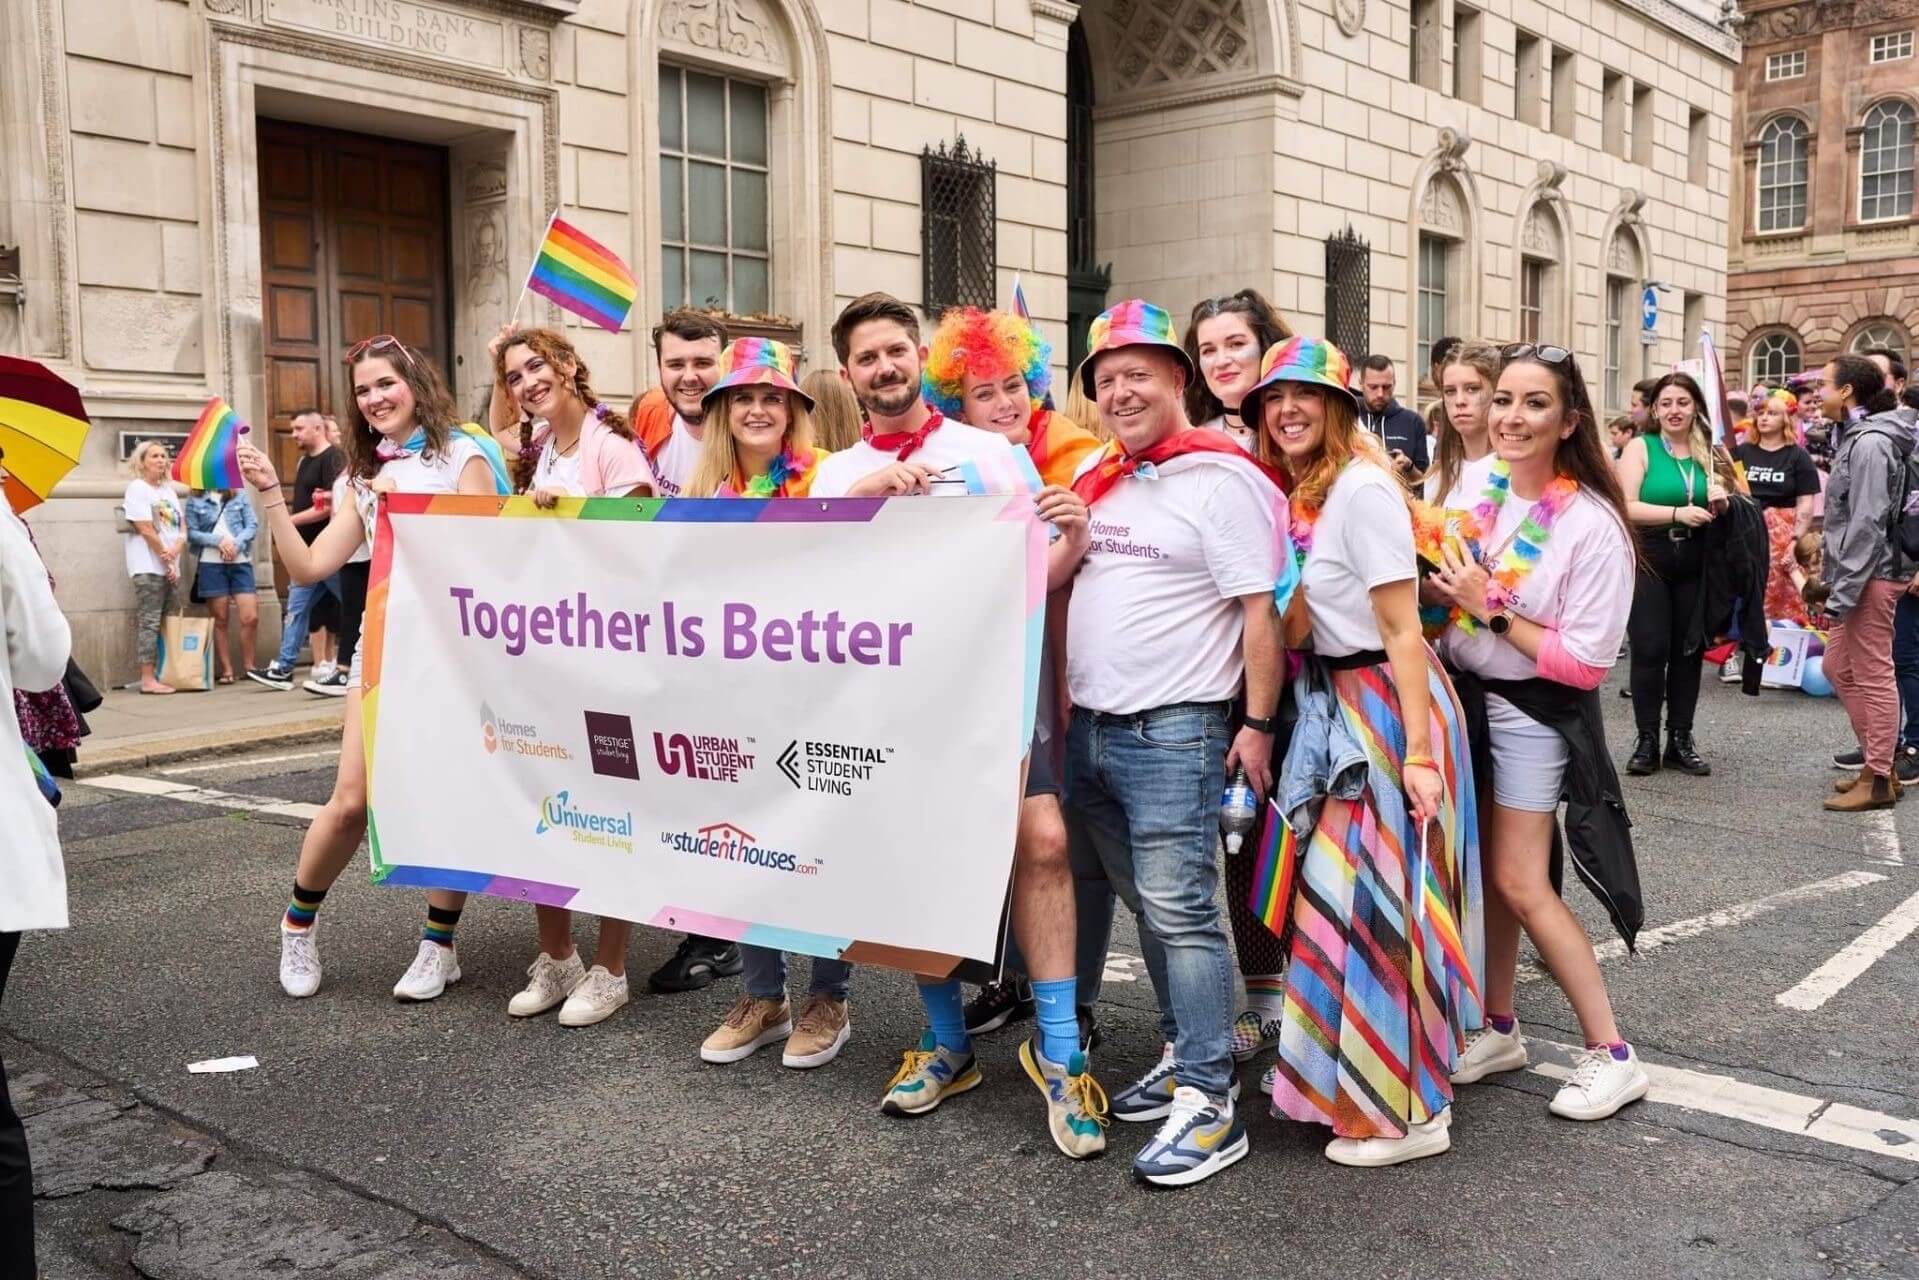 Homes for Students Marches on Liverpool Pride 2022